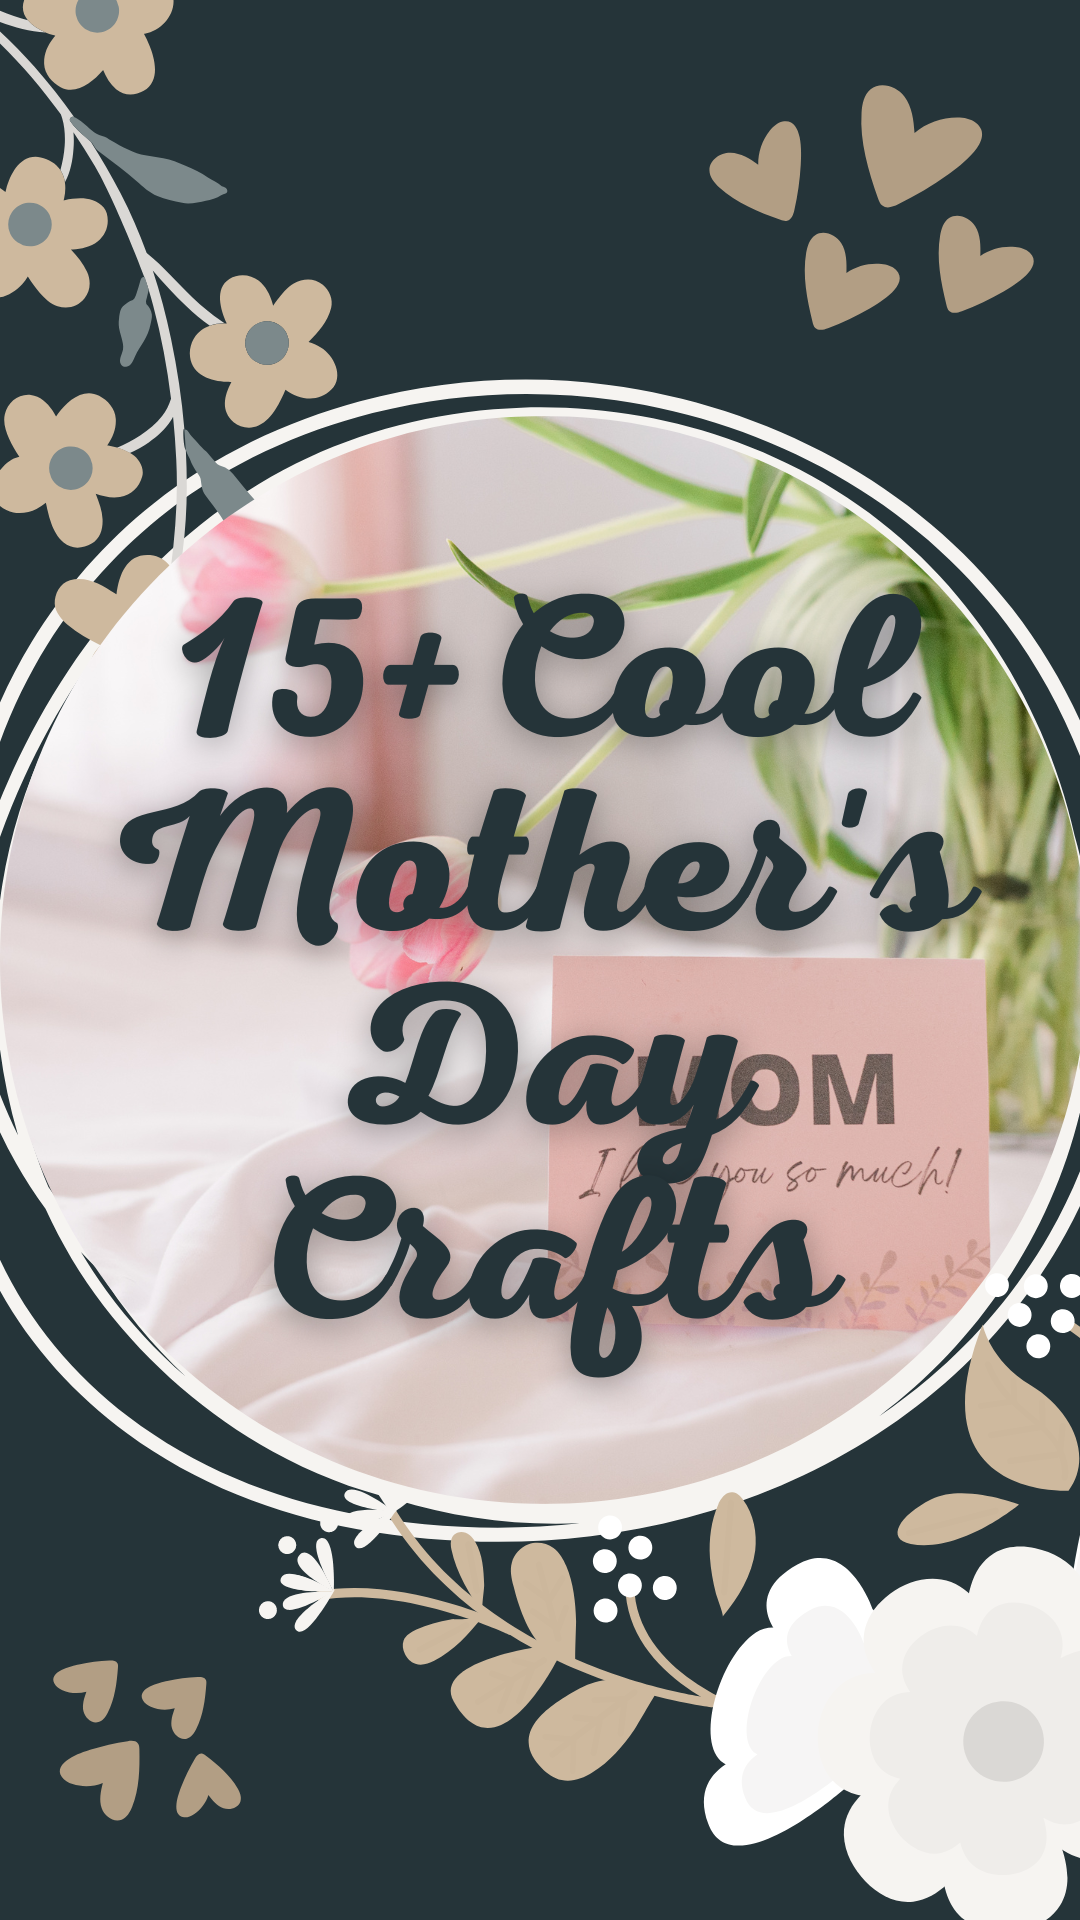 Mother's Day is just around the corner, and what better way to show your love and appreciation than with a heartfelt, handmade gift? This year, skip the store-bought presents and let your creativity shine with these 15 creative and cool Mother's Day craft ideas that are sure to wow your mom. From personalized photo albums to DIY spa kits, we've got you covered with unique and thoughtful gift ideas that will make her feel extra special. Whether you're a crafting pro or a beginner, these crafts are easy to make and require just a few supplies.